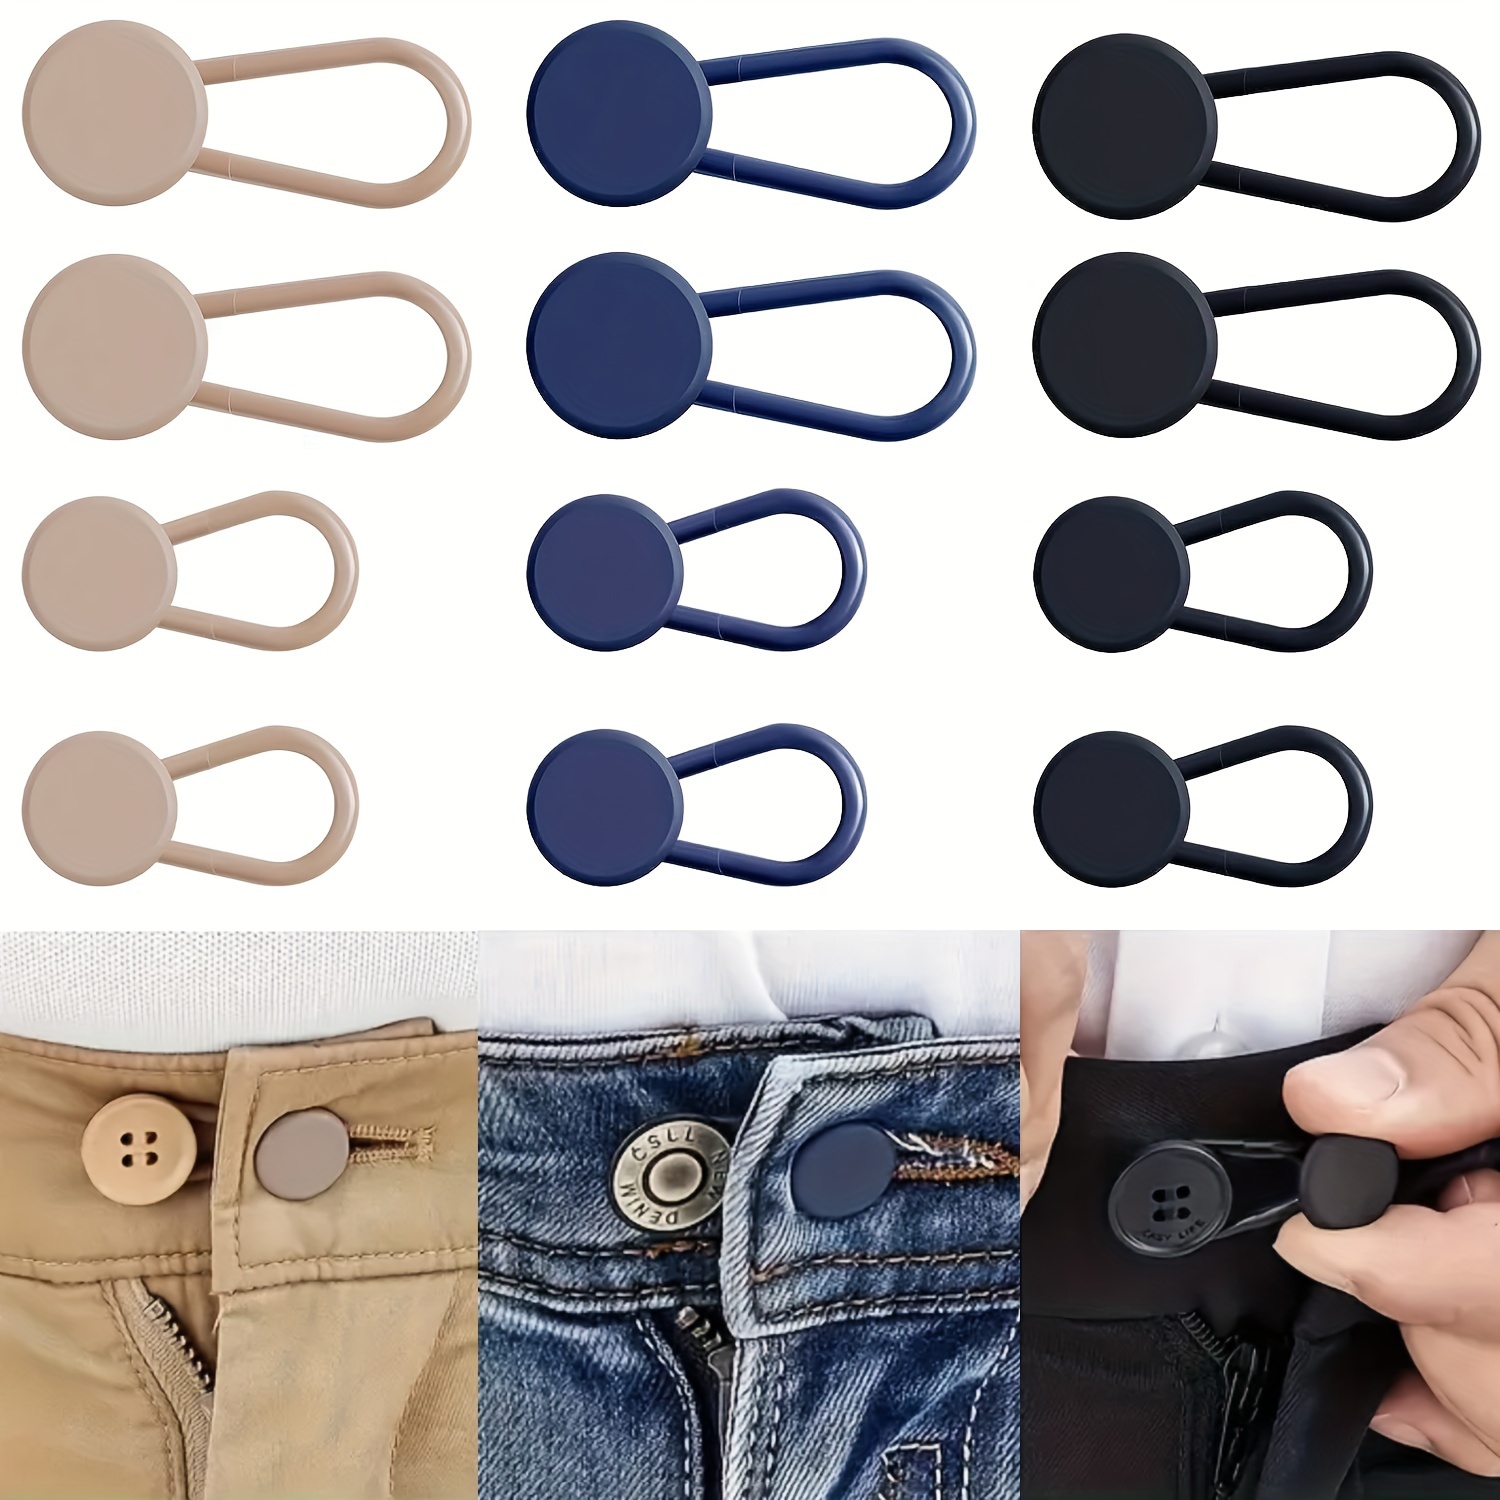 

easy-fit" 12-piece No-sew Jean Waist Extenders - Adjustable Pants Button Expanders, Adds 1-1.4 Inches, Unisex, In Khaki/blue/black